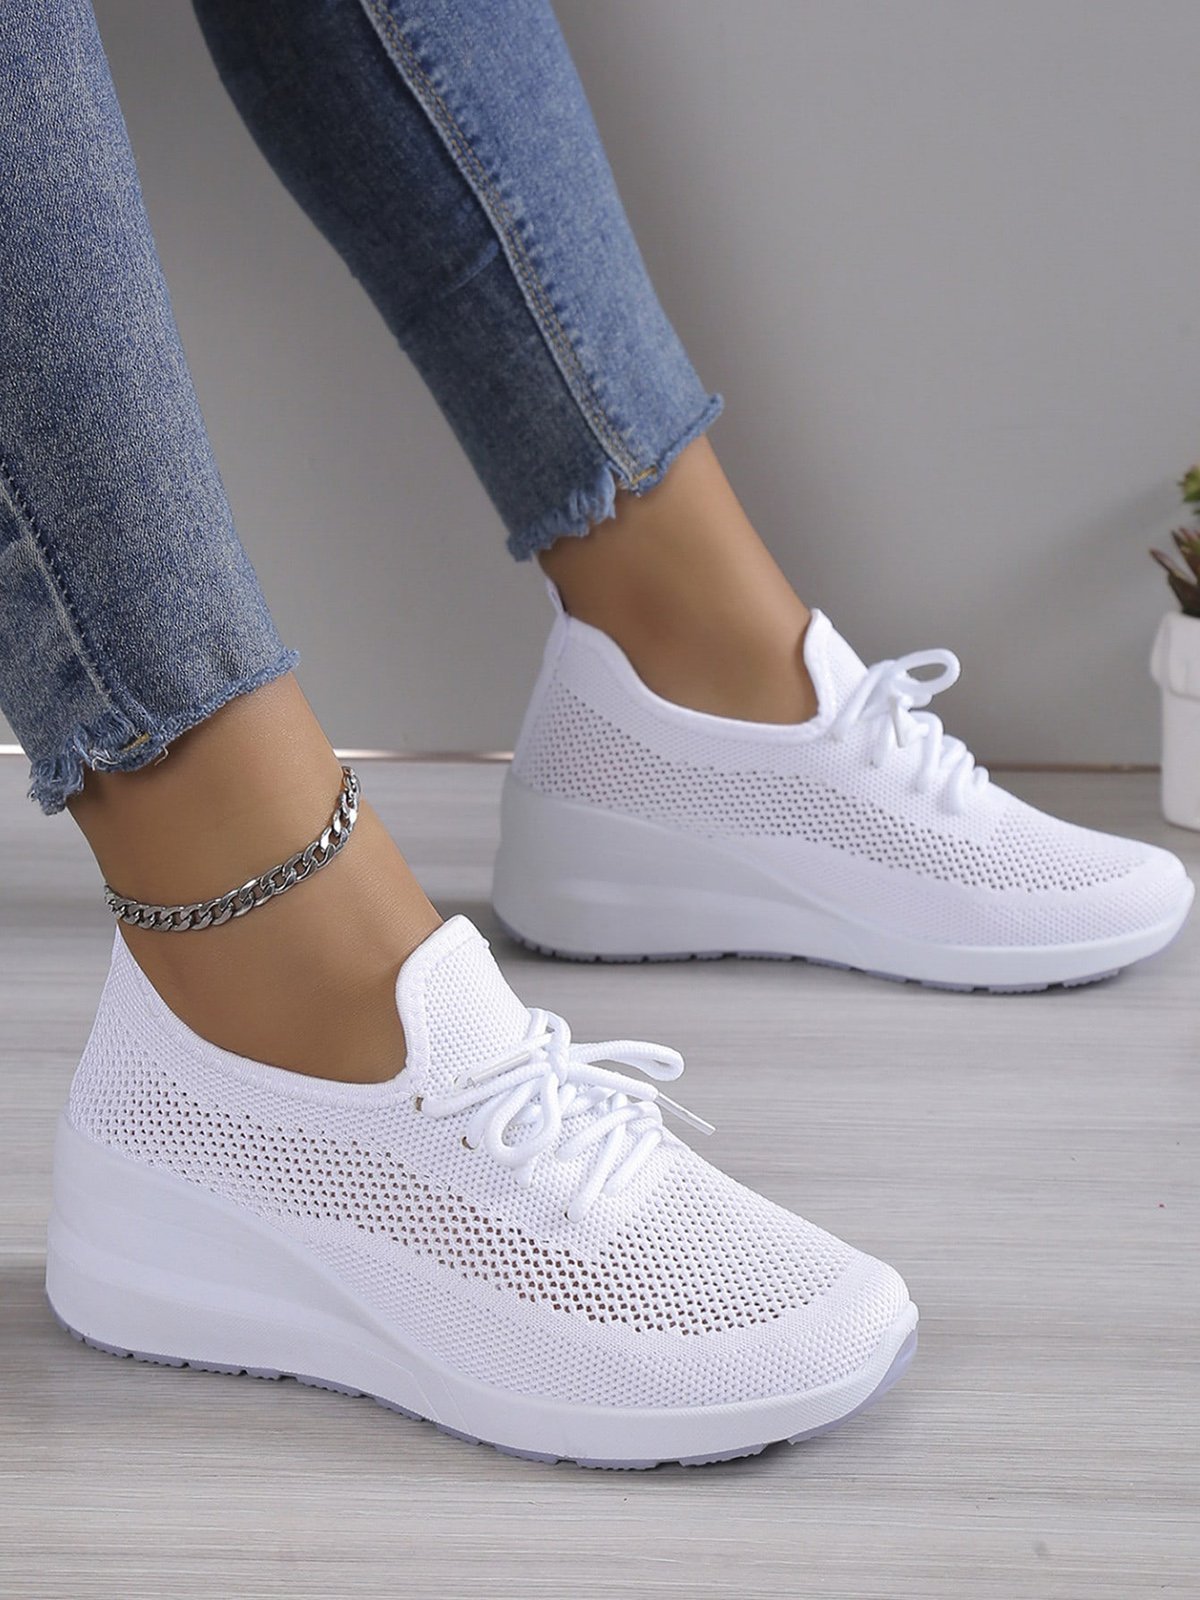 Casual Plain Breathable Lace-Up Block Heel Fly Woven Shoes Hollow Out ...